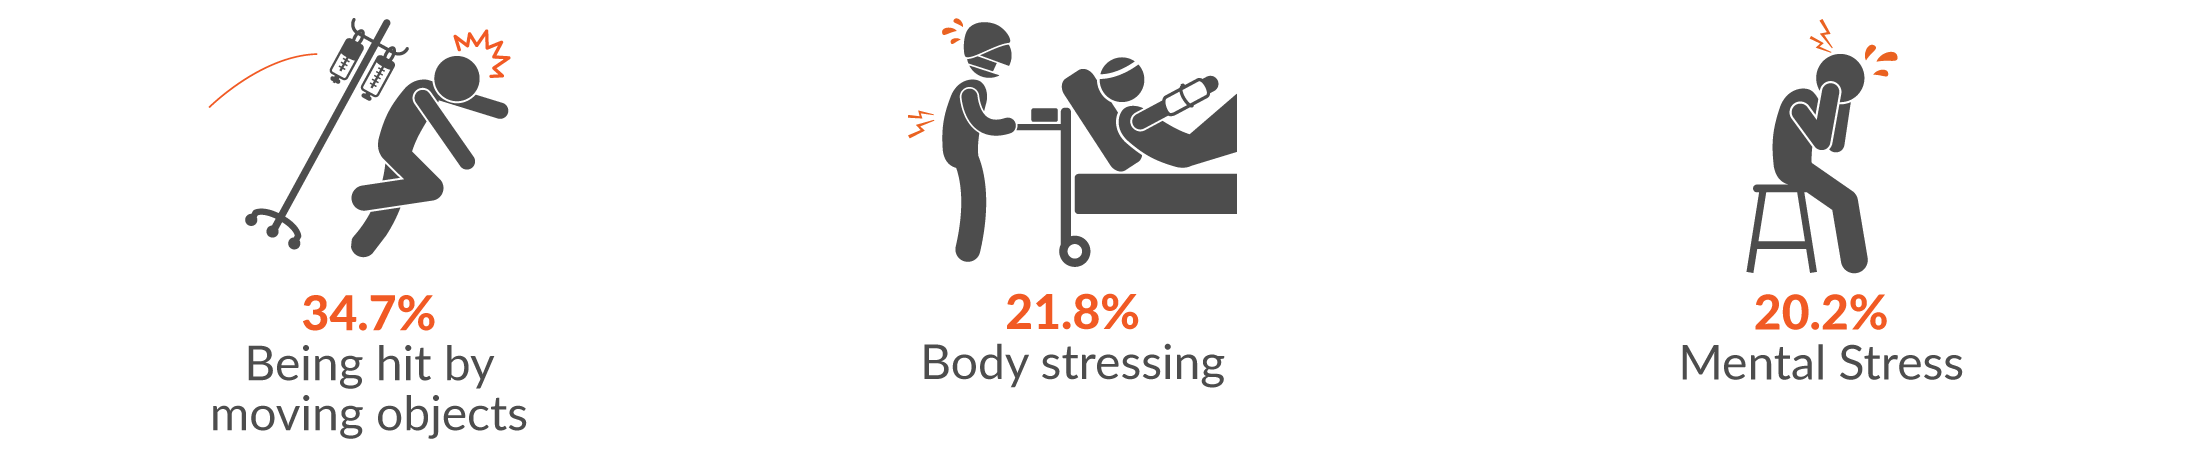 This infographic shows the main three mechanisms of serious injury for health and community services claims were 34.7% being hit by moving objects; 21.8% body stressing; and 20.2% mental stress.